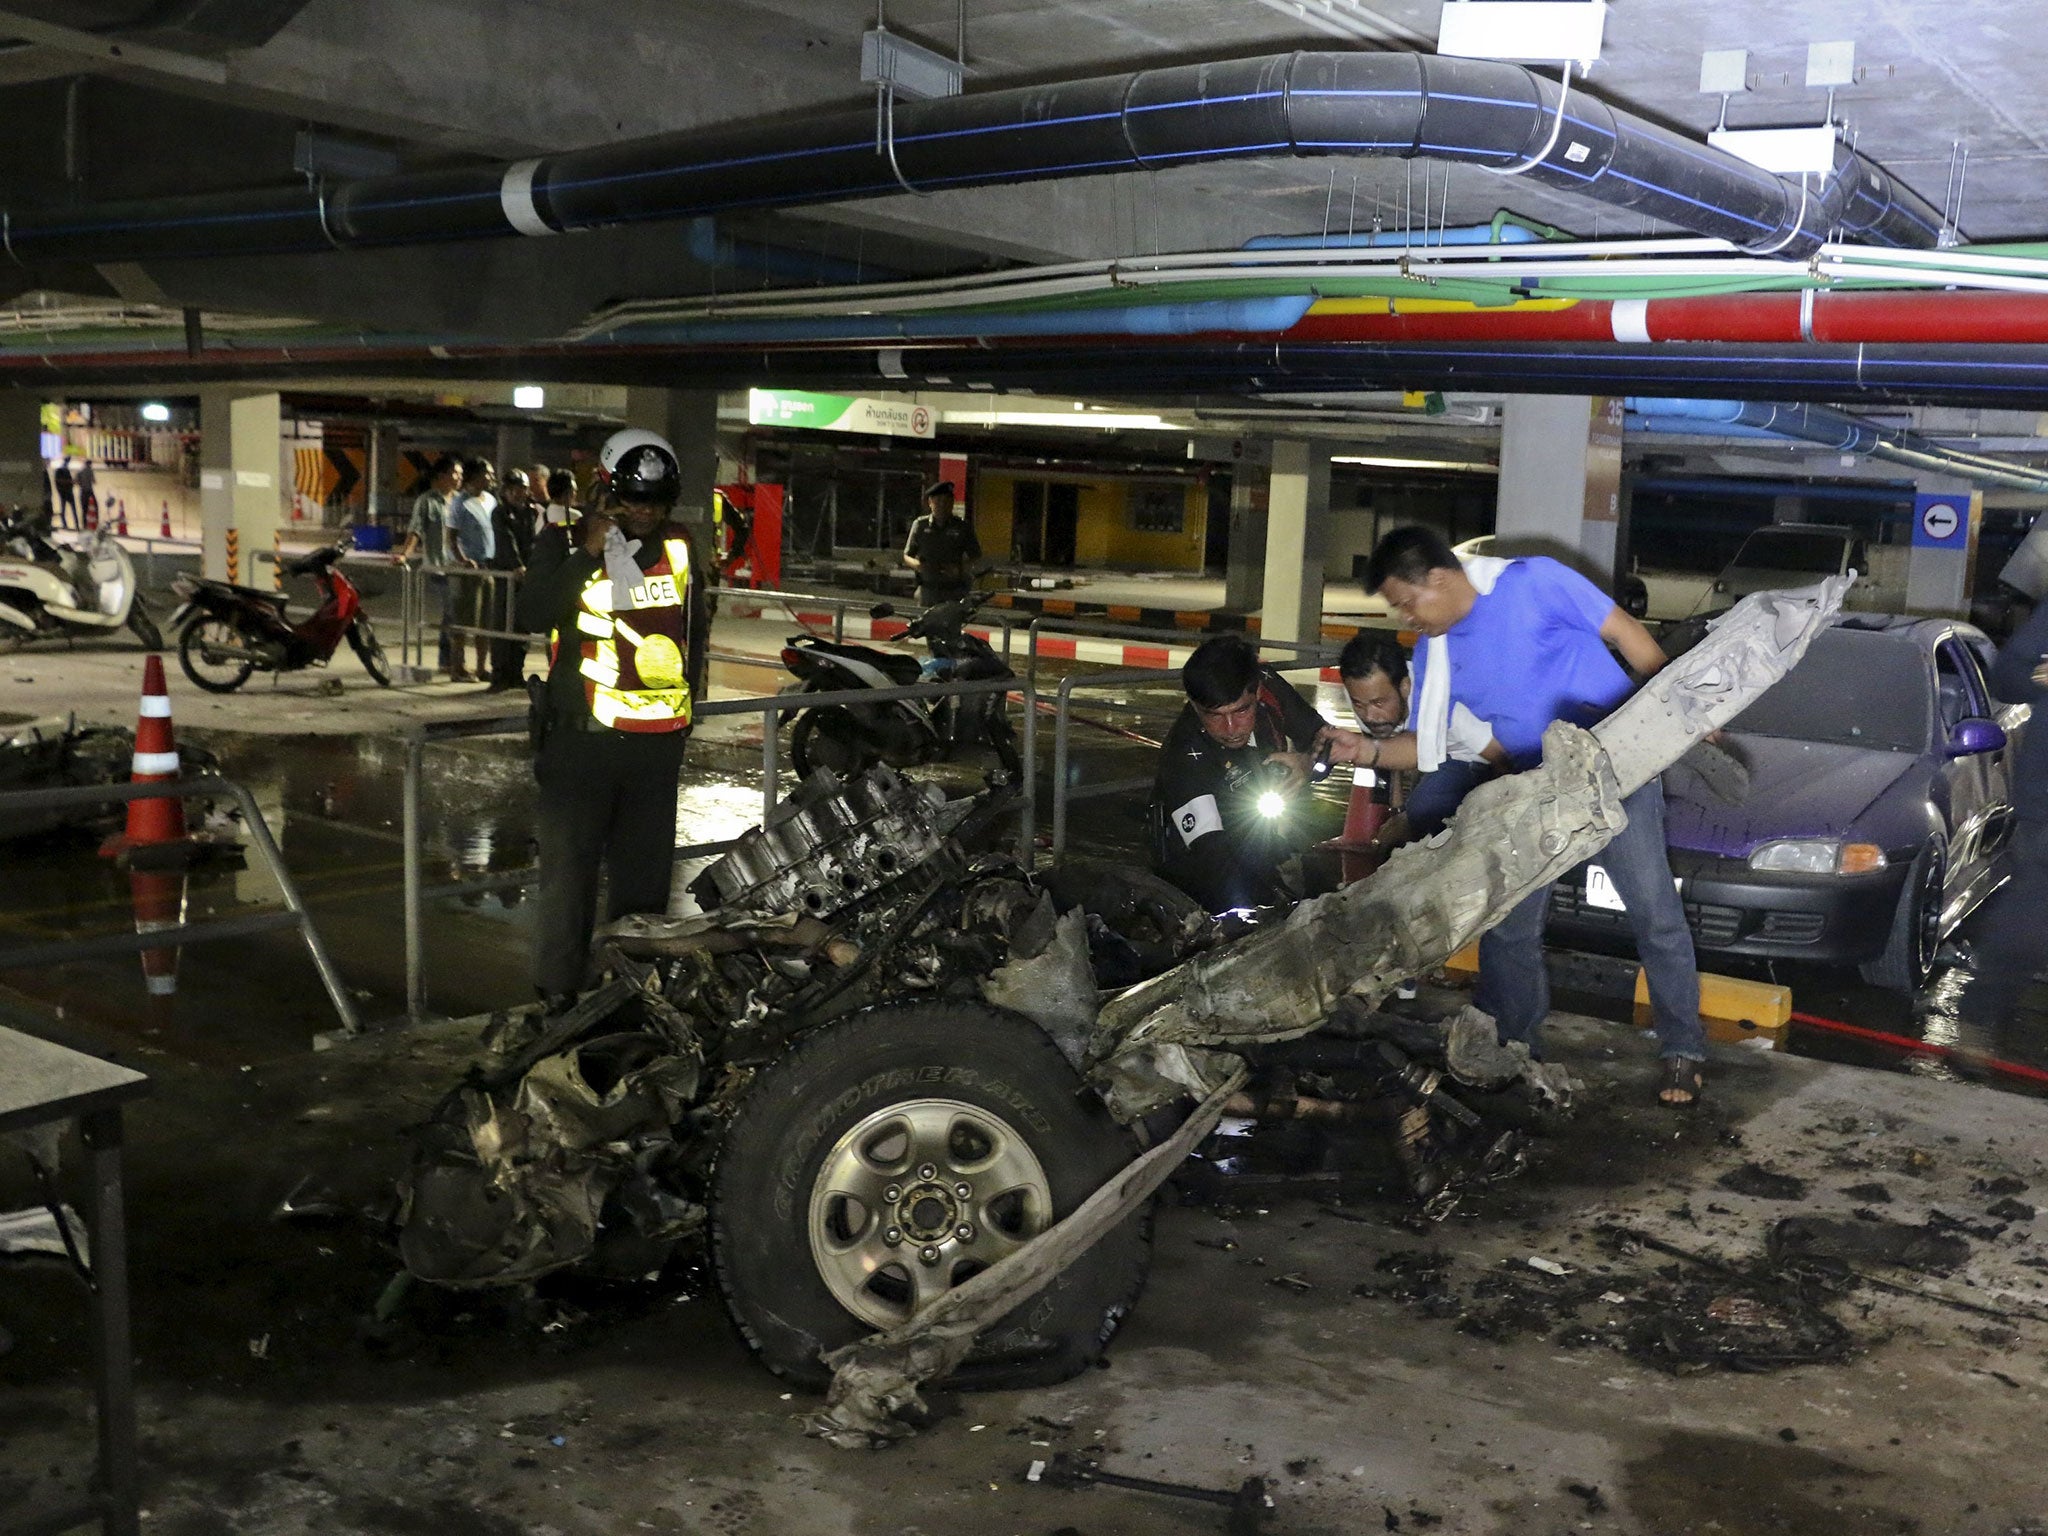 Police officers inspect the remains of the car after the bombing at the shopping mall in Koh Samui, Thailand